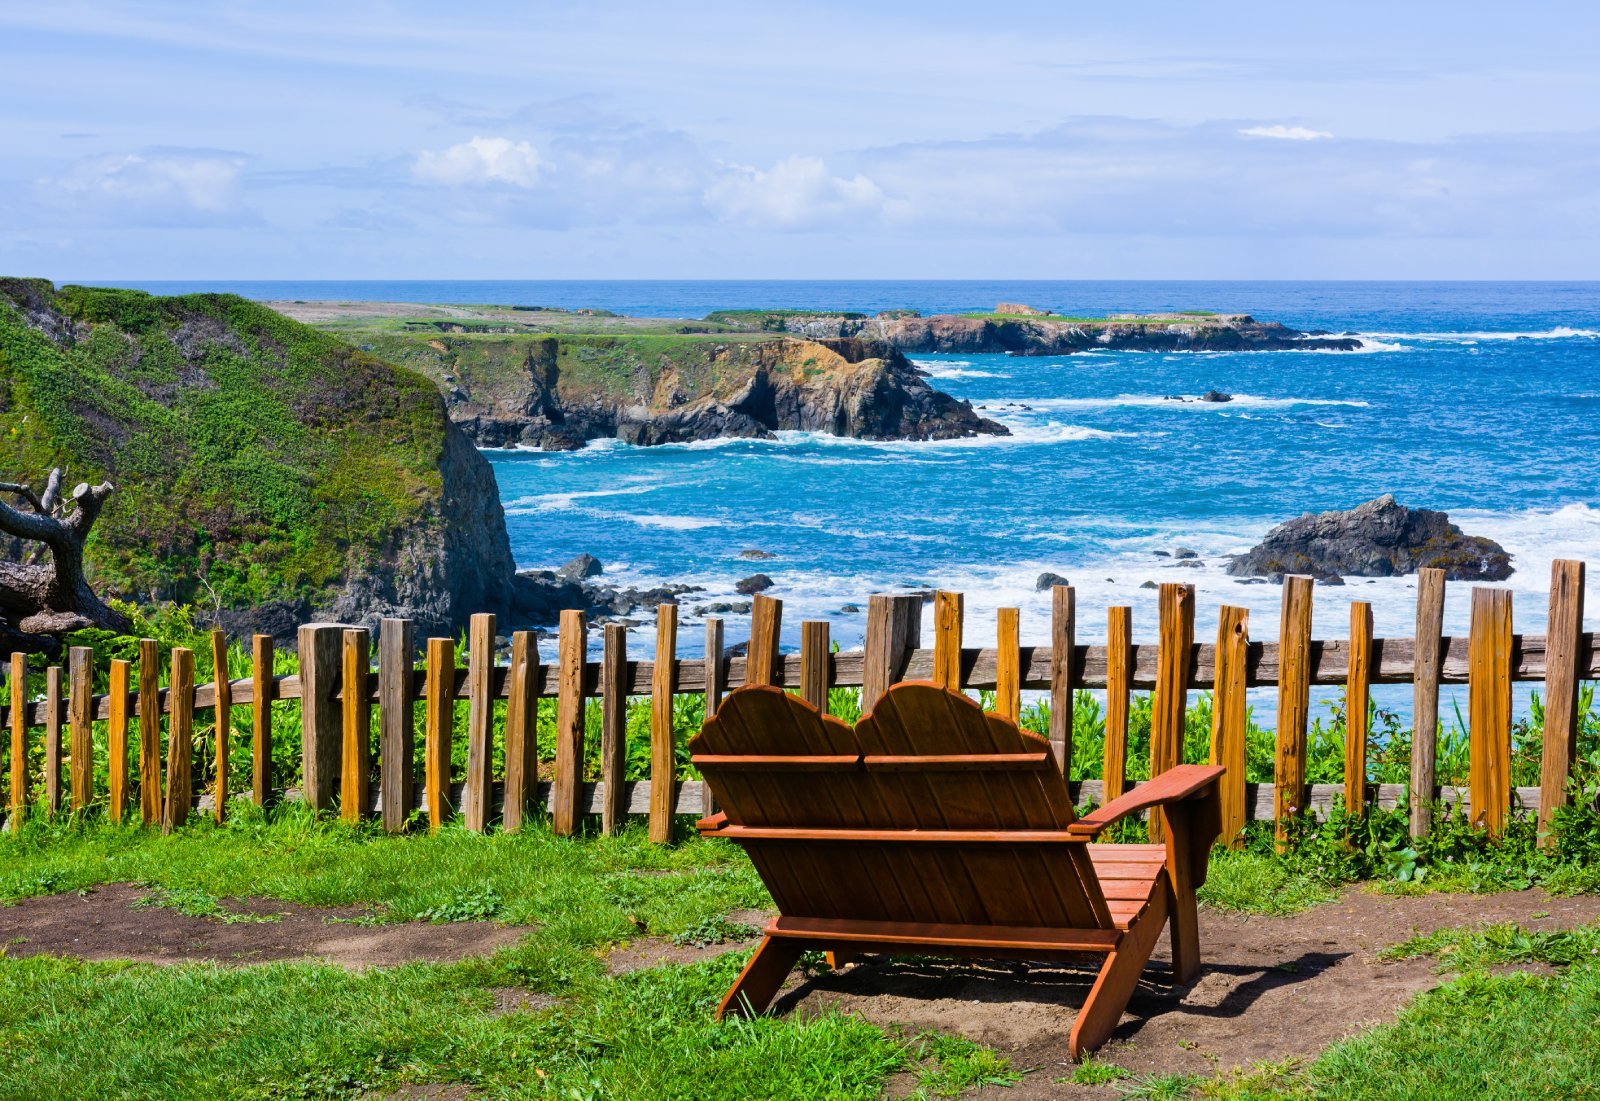 Image Credit: Shutterstock / Andrew Zarivny <p>Forget the expensive Napa tours and head to Mendocino, where rugged coastlines meet redwood forests. Wine tasting here is just as good and often cheaper, with less hustle to cloud your relaxation.</p>